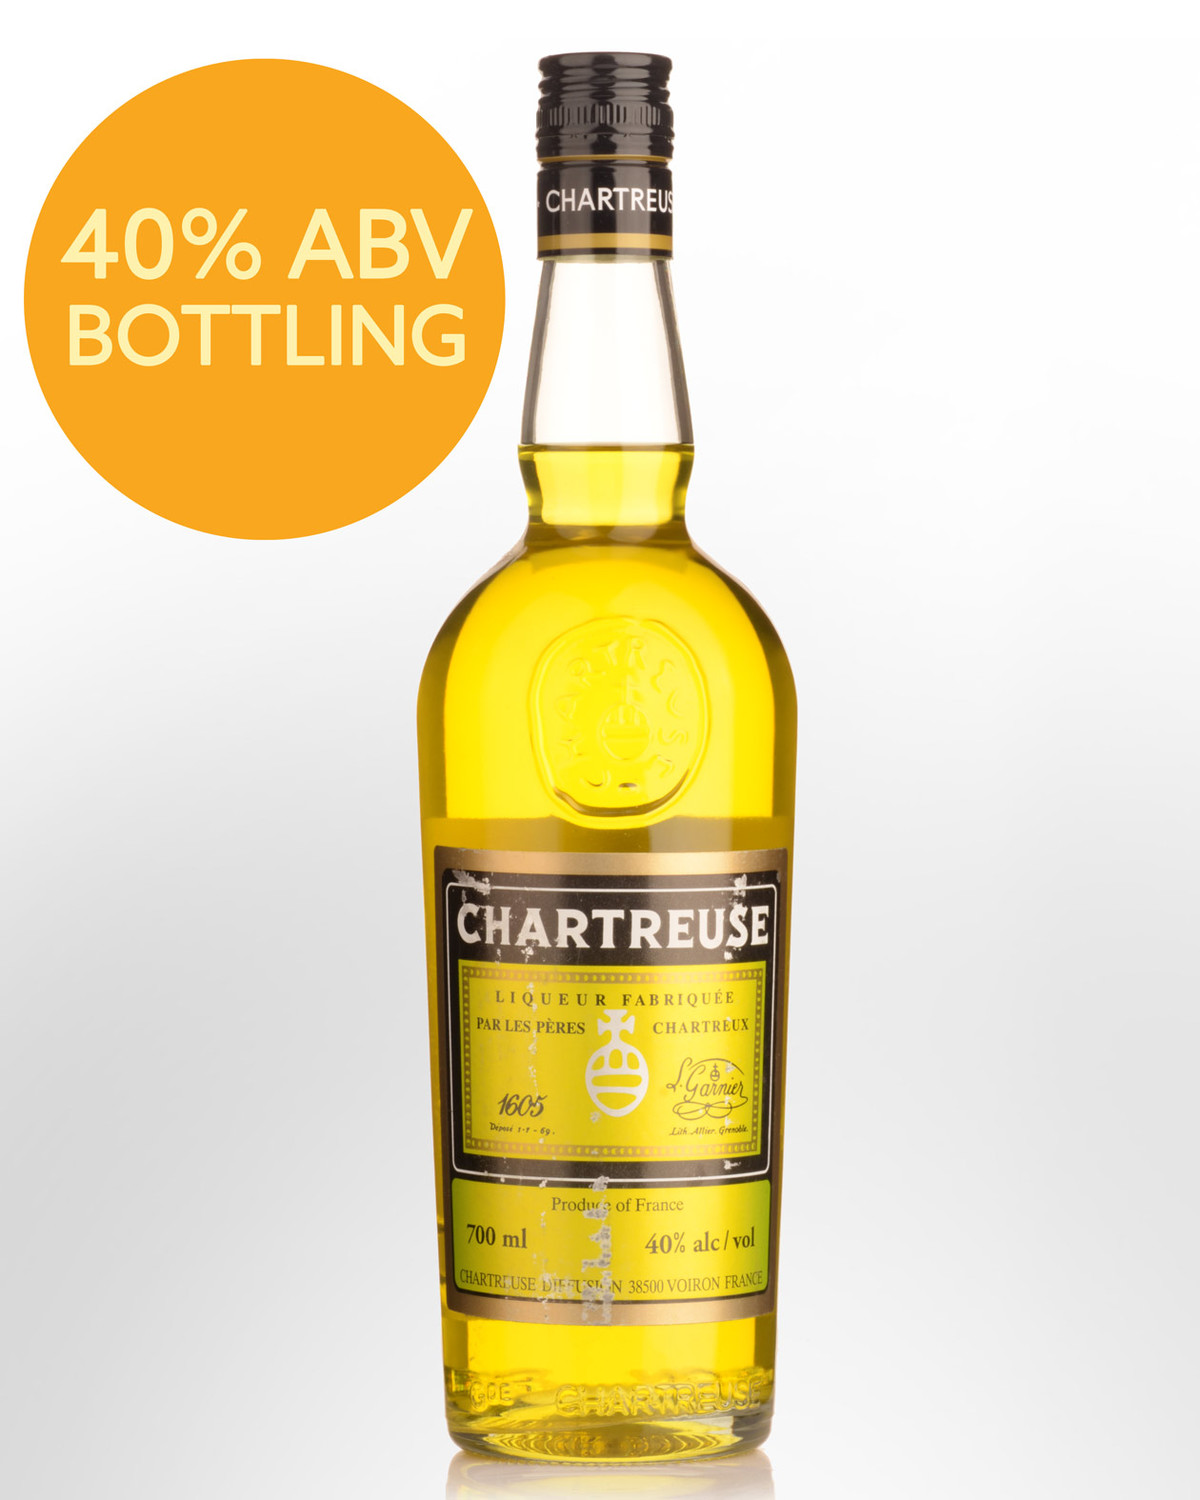 Chartreuse Yellow Liqueur (700ml) - 40% ABV bottling